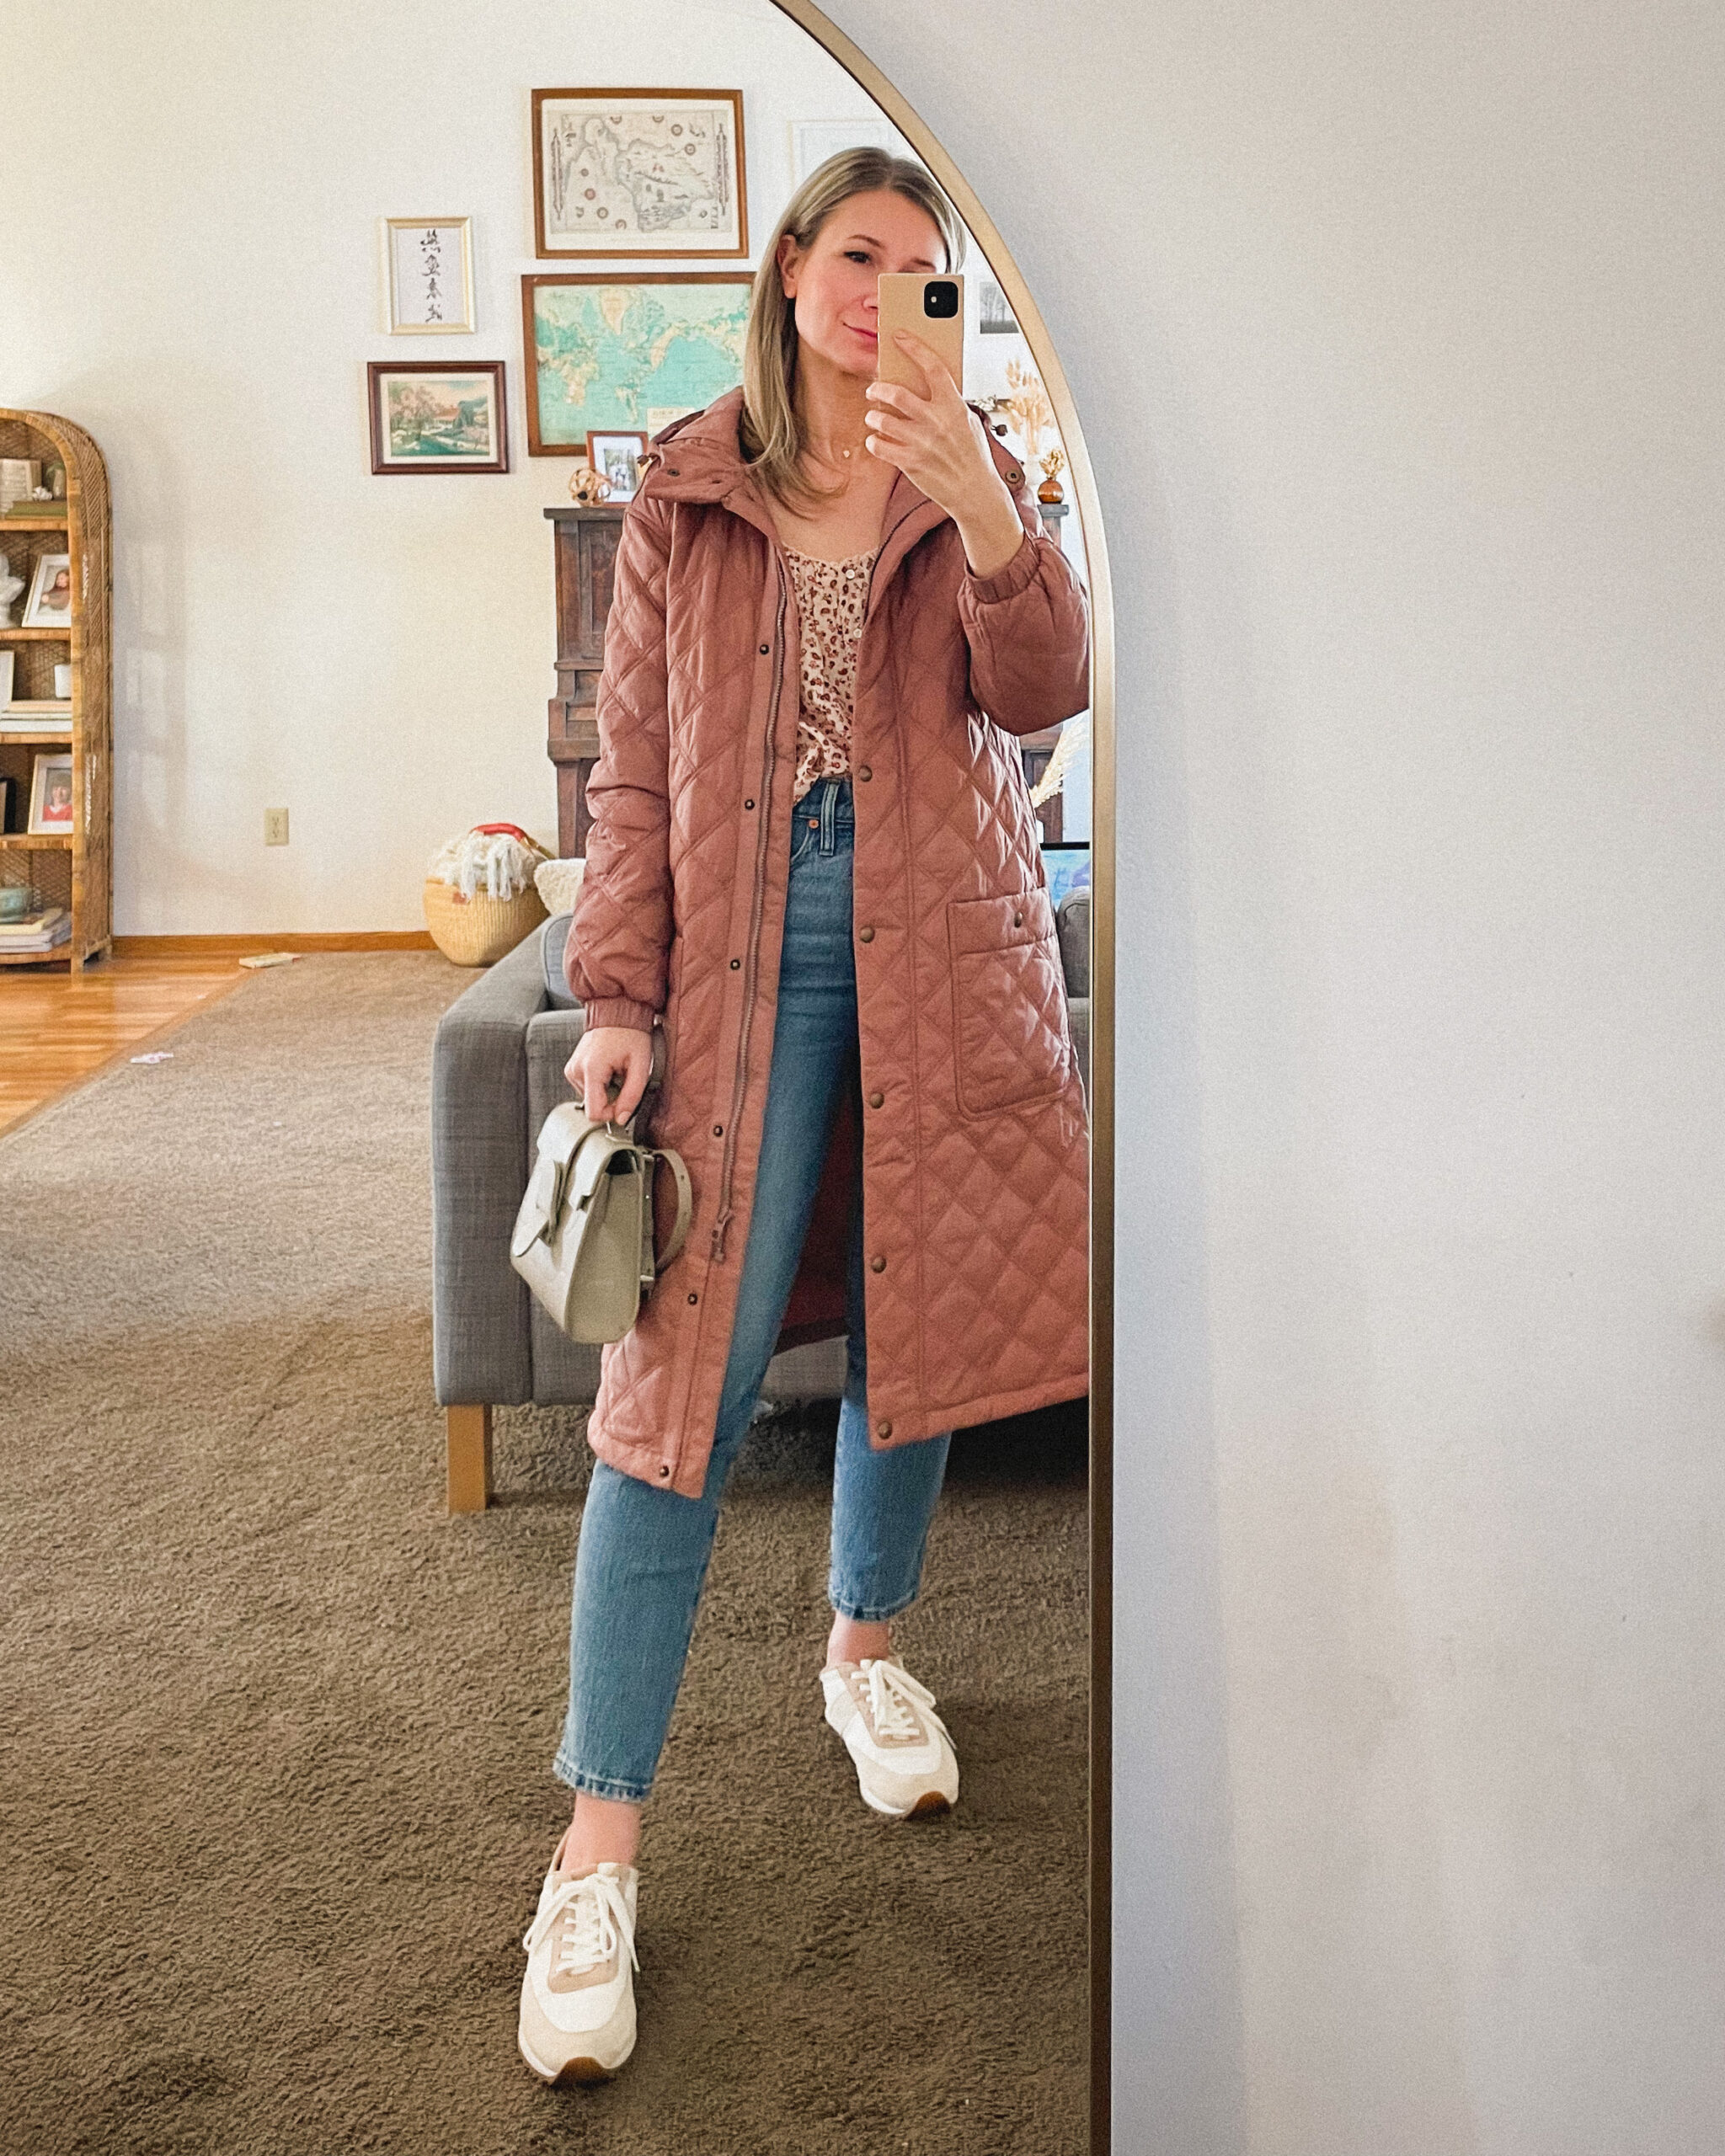 Karin Emily wears a pink quilted coat, pink floral top from Doen, Madewell perfect vintage jeans, and pink sneakers